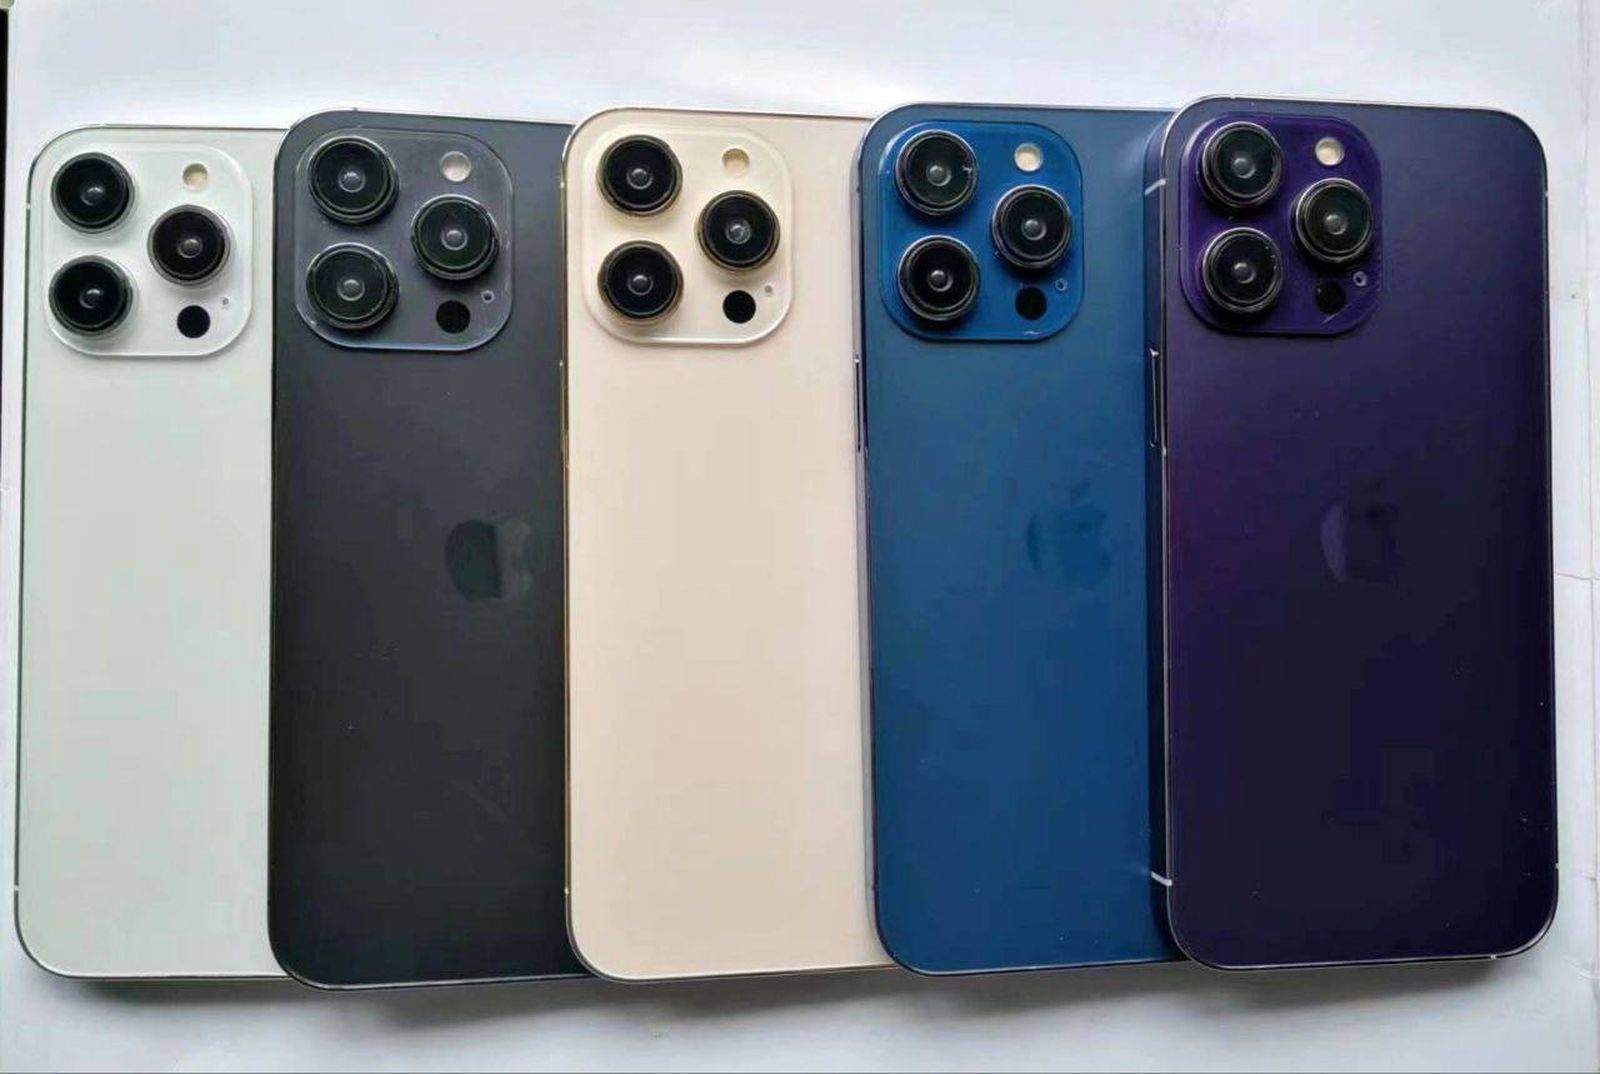 iphone-14-pro-purple-and-blue-colors-appear-on-dummy-models